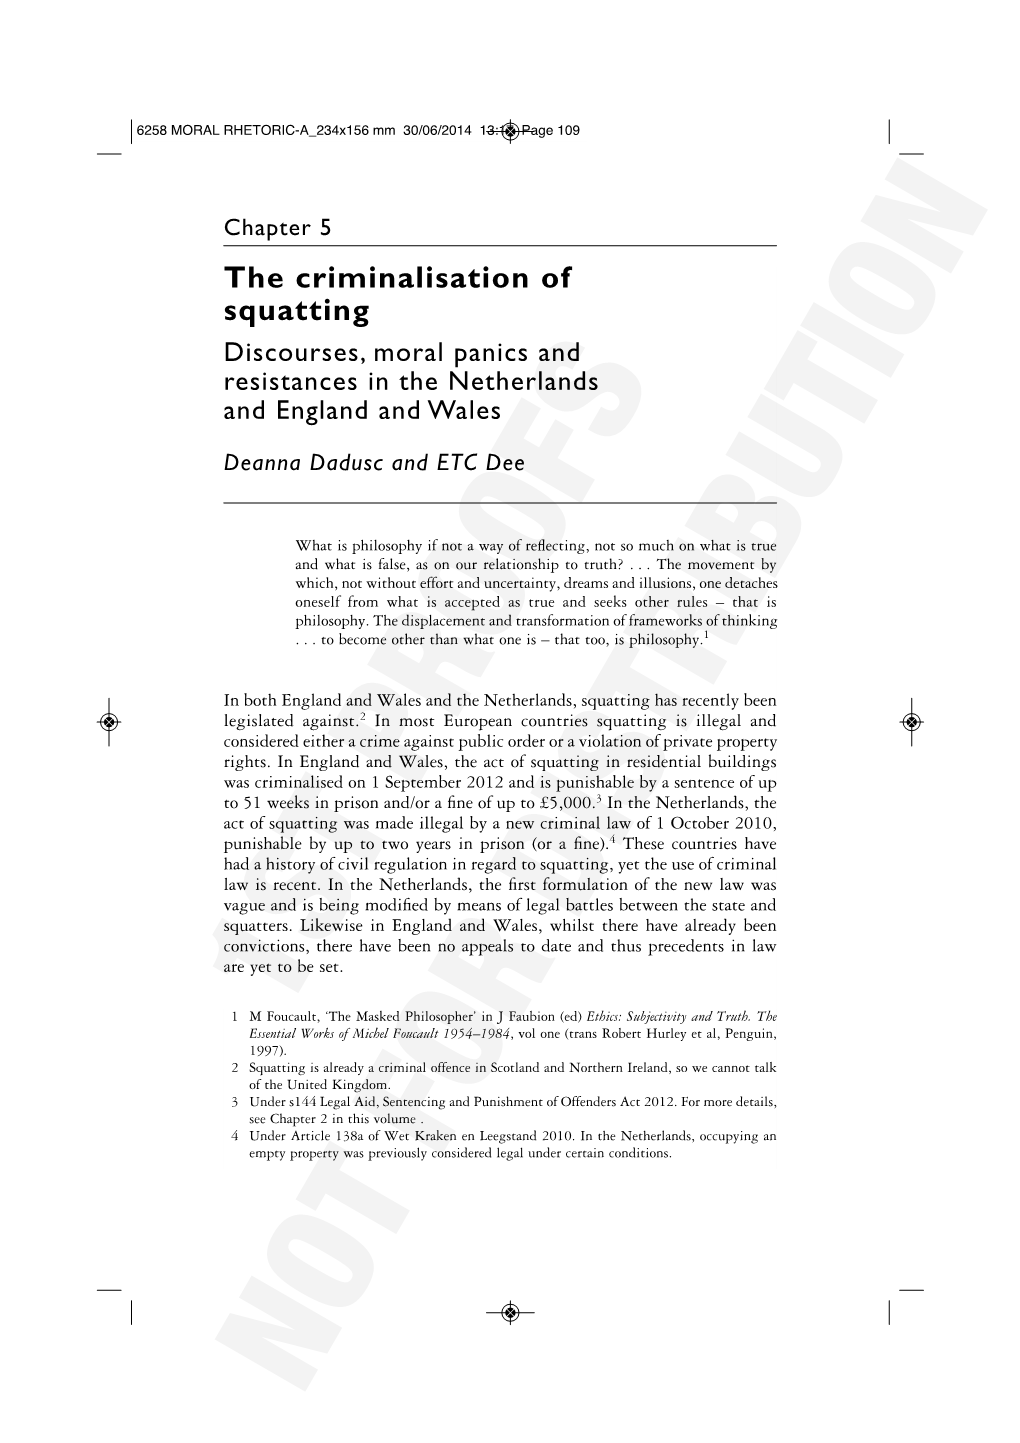 The Criminalisation of Squatting Discourses, Moral Panics and Resistances in the Netherlands and England and Wales